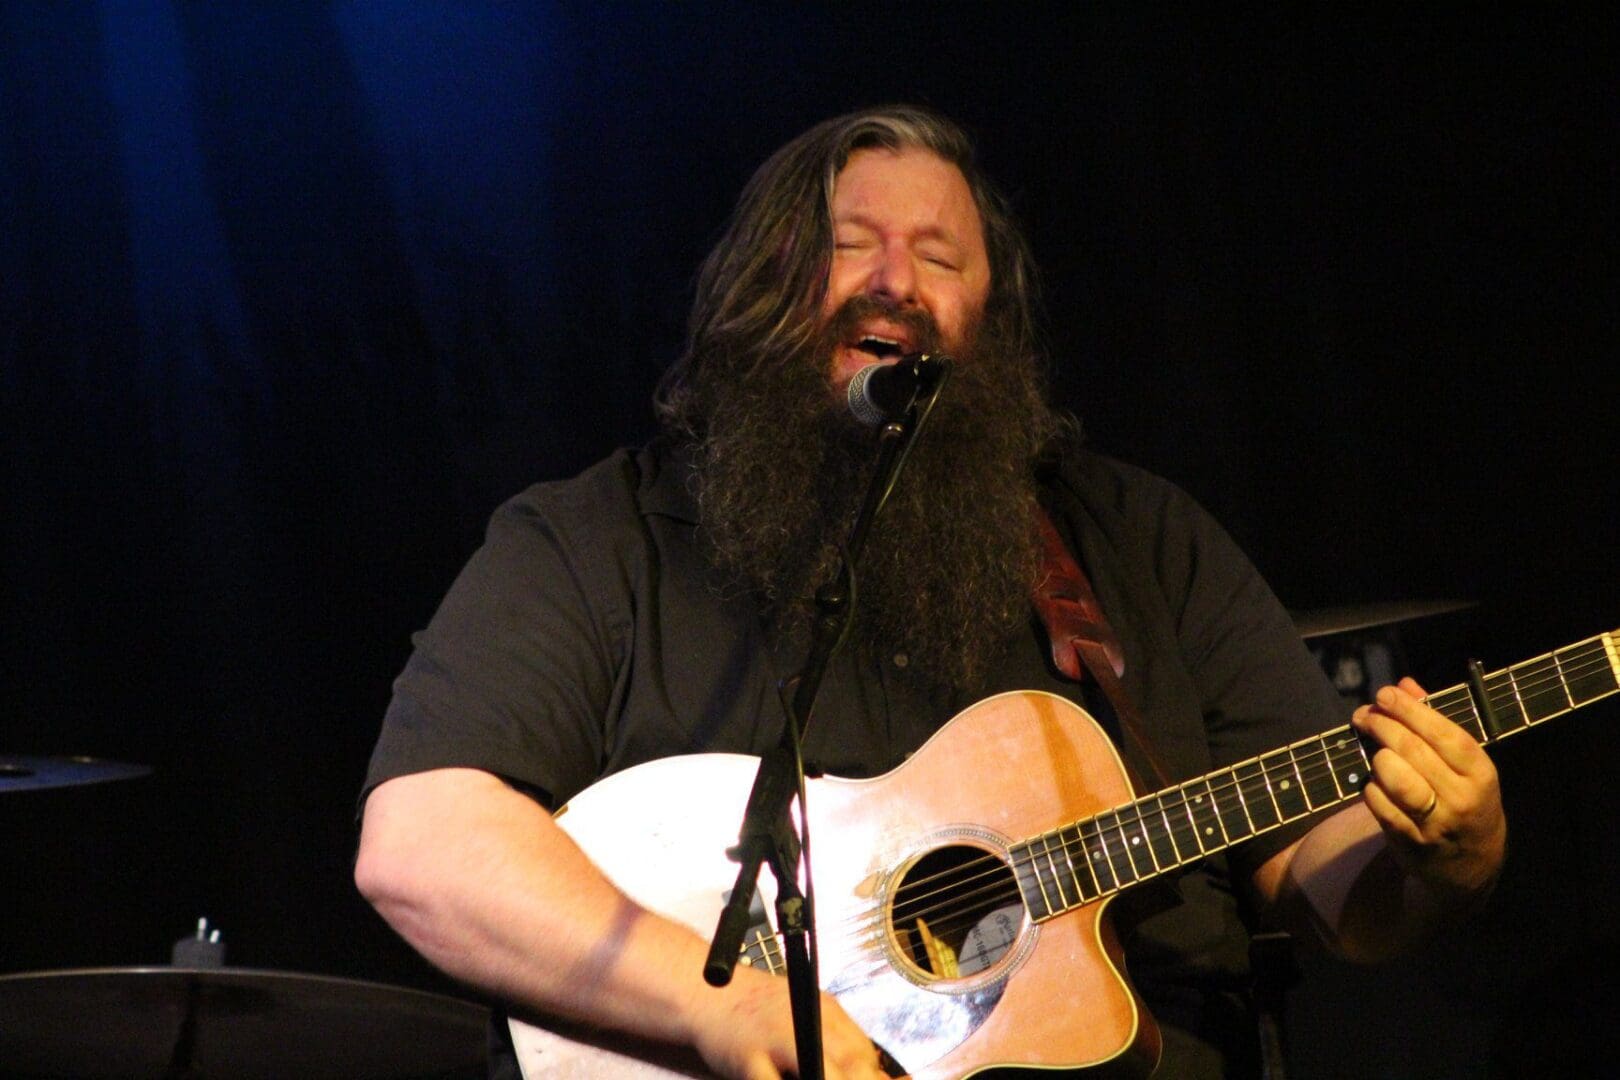 A man with a beard playing an acoustic guitar.